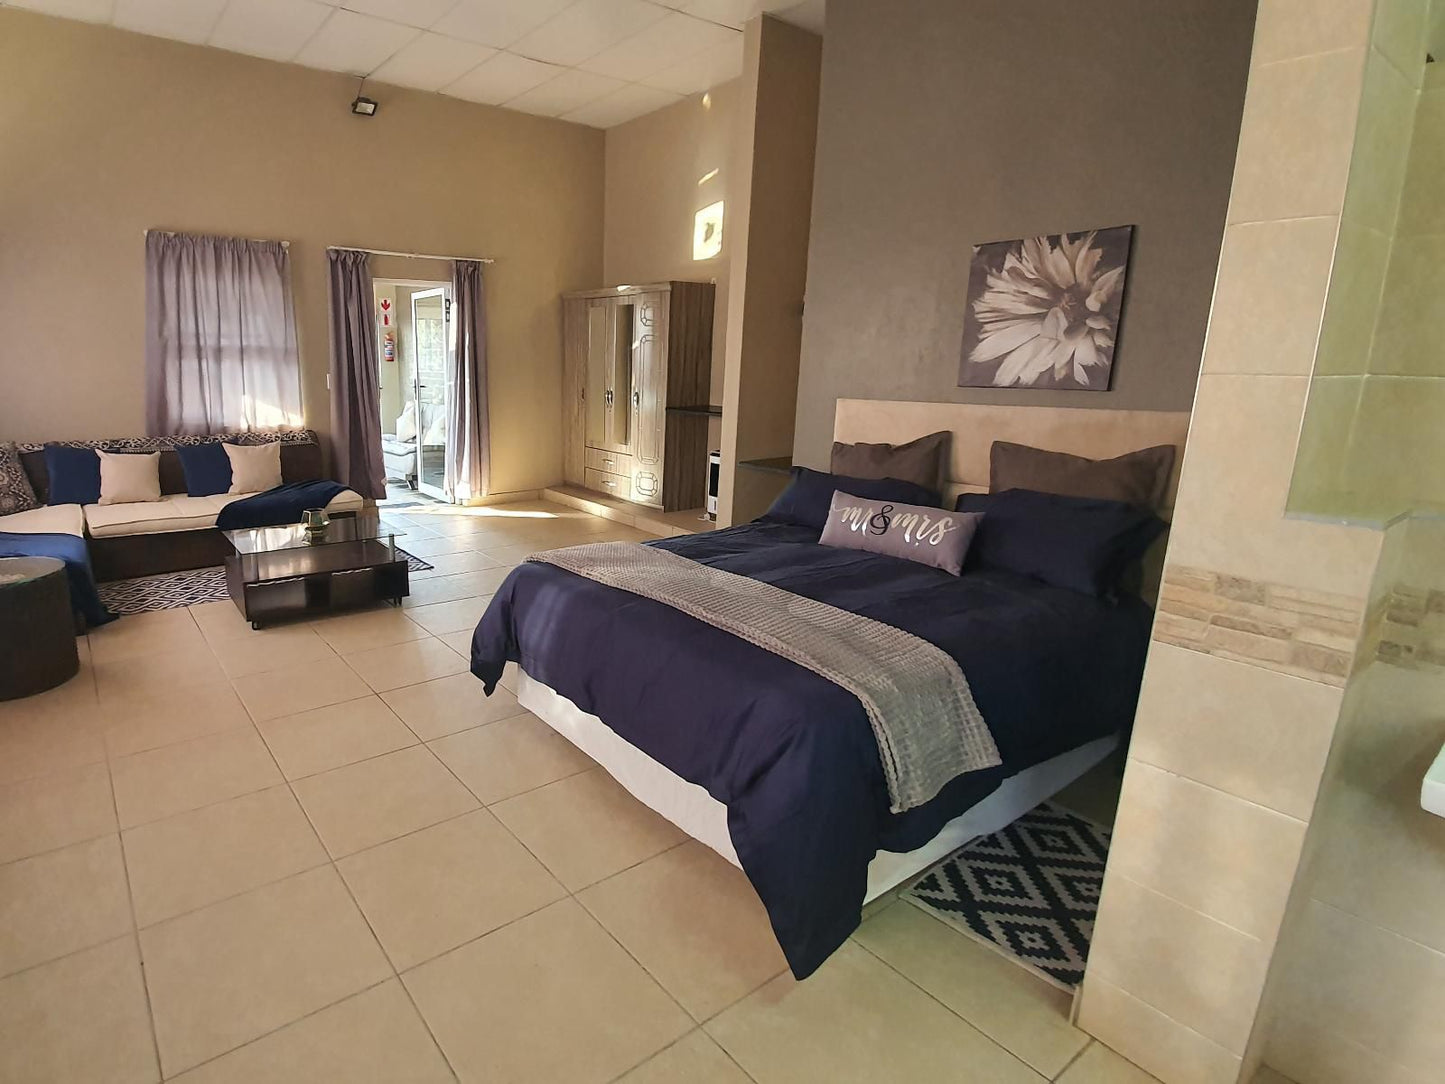 Koi Inn Hartbeespoort North West Province South Africa Bedroom